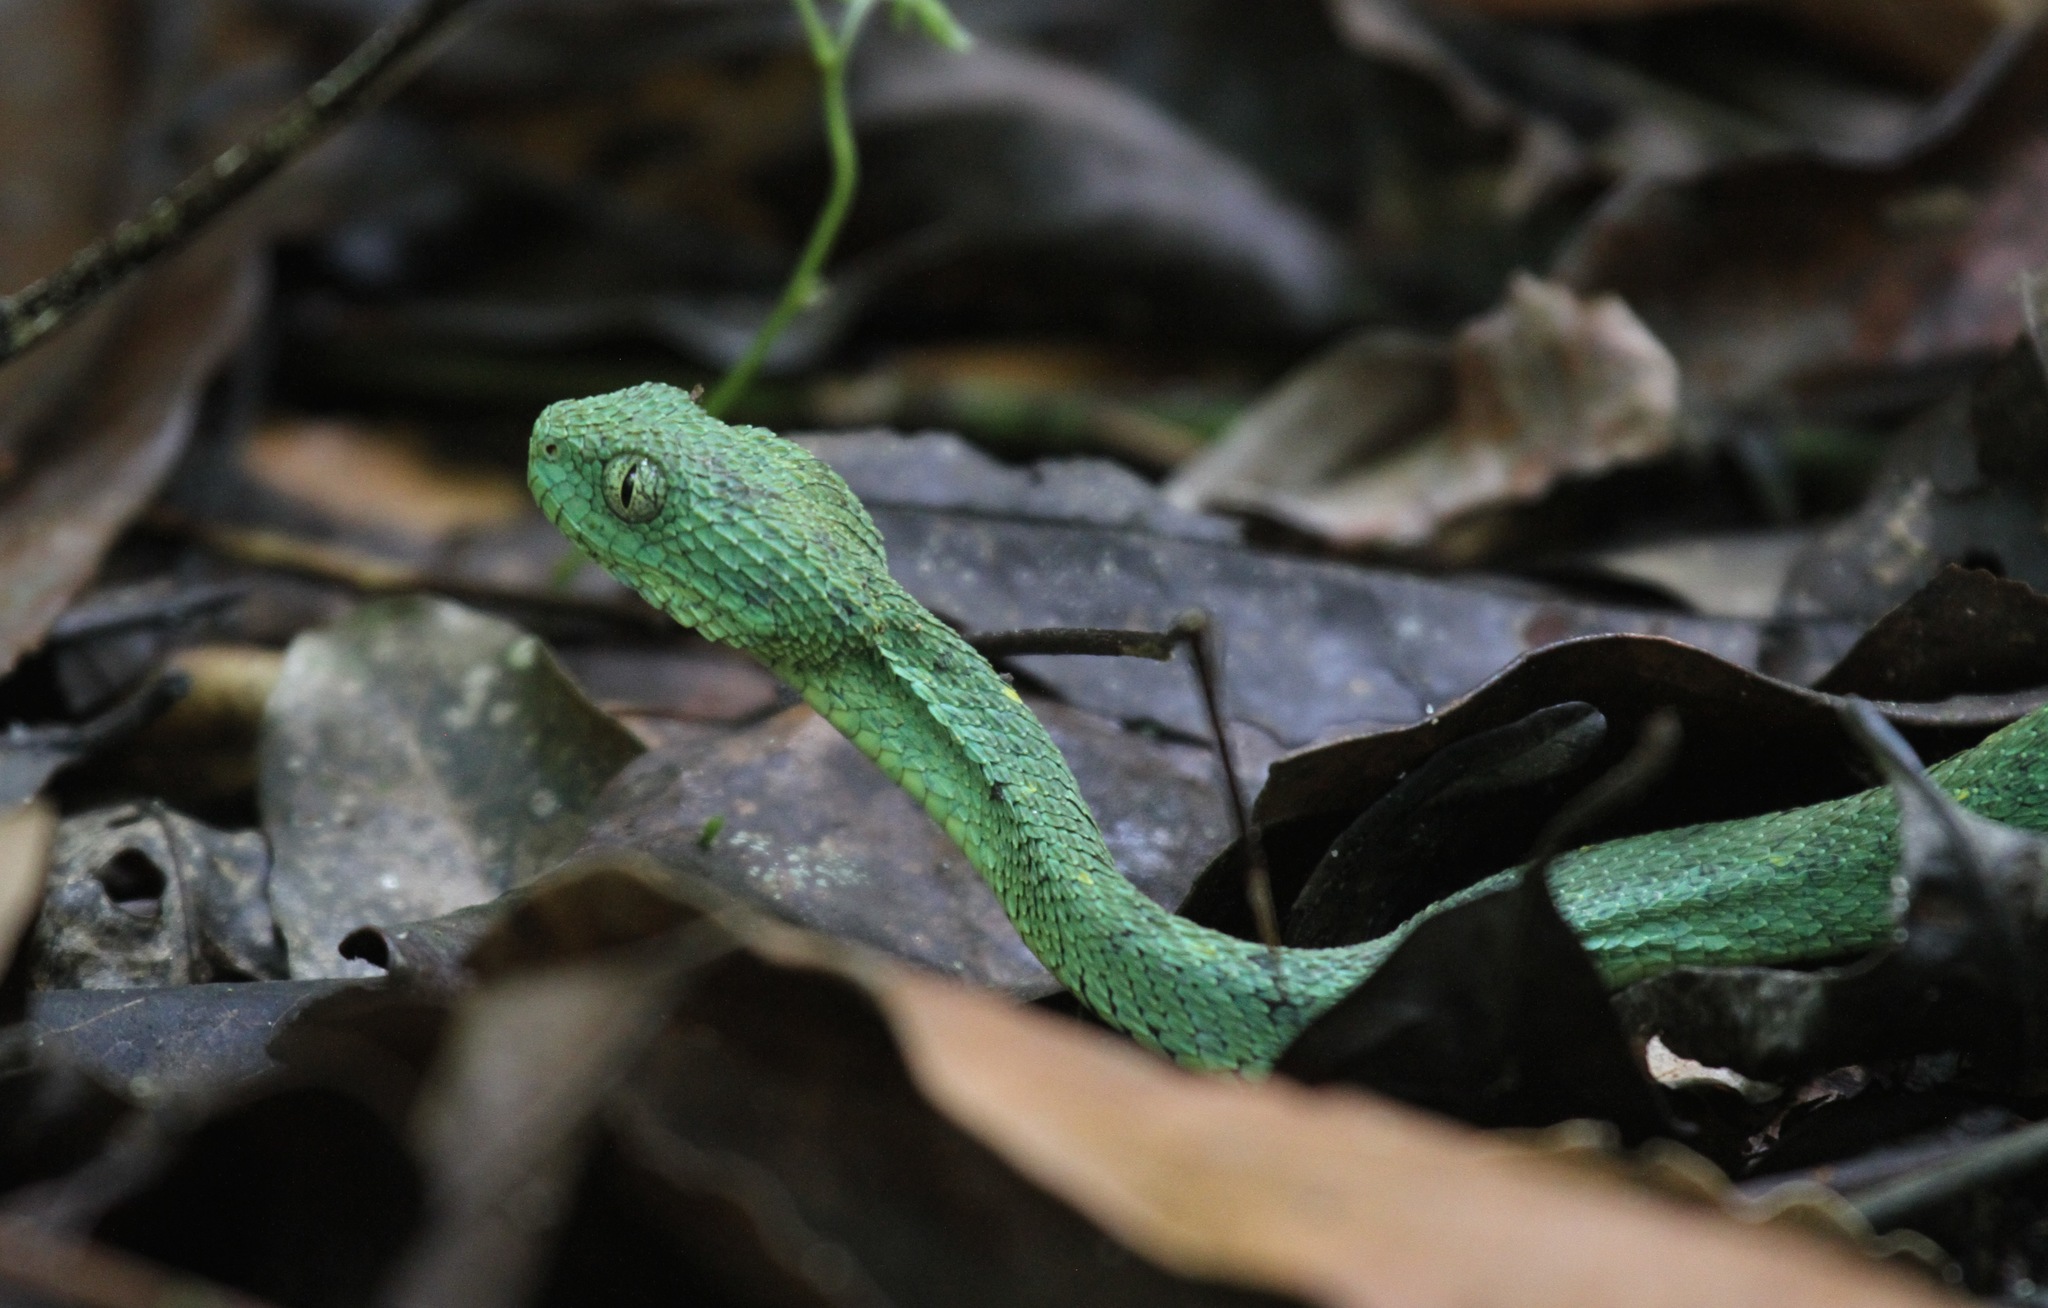 Green Bush Viper (Atheris chlorechis). Forests of West Africa. venomous